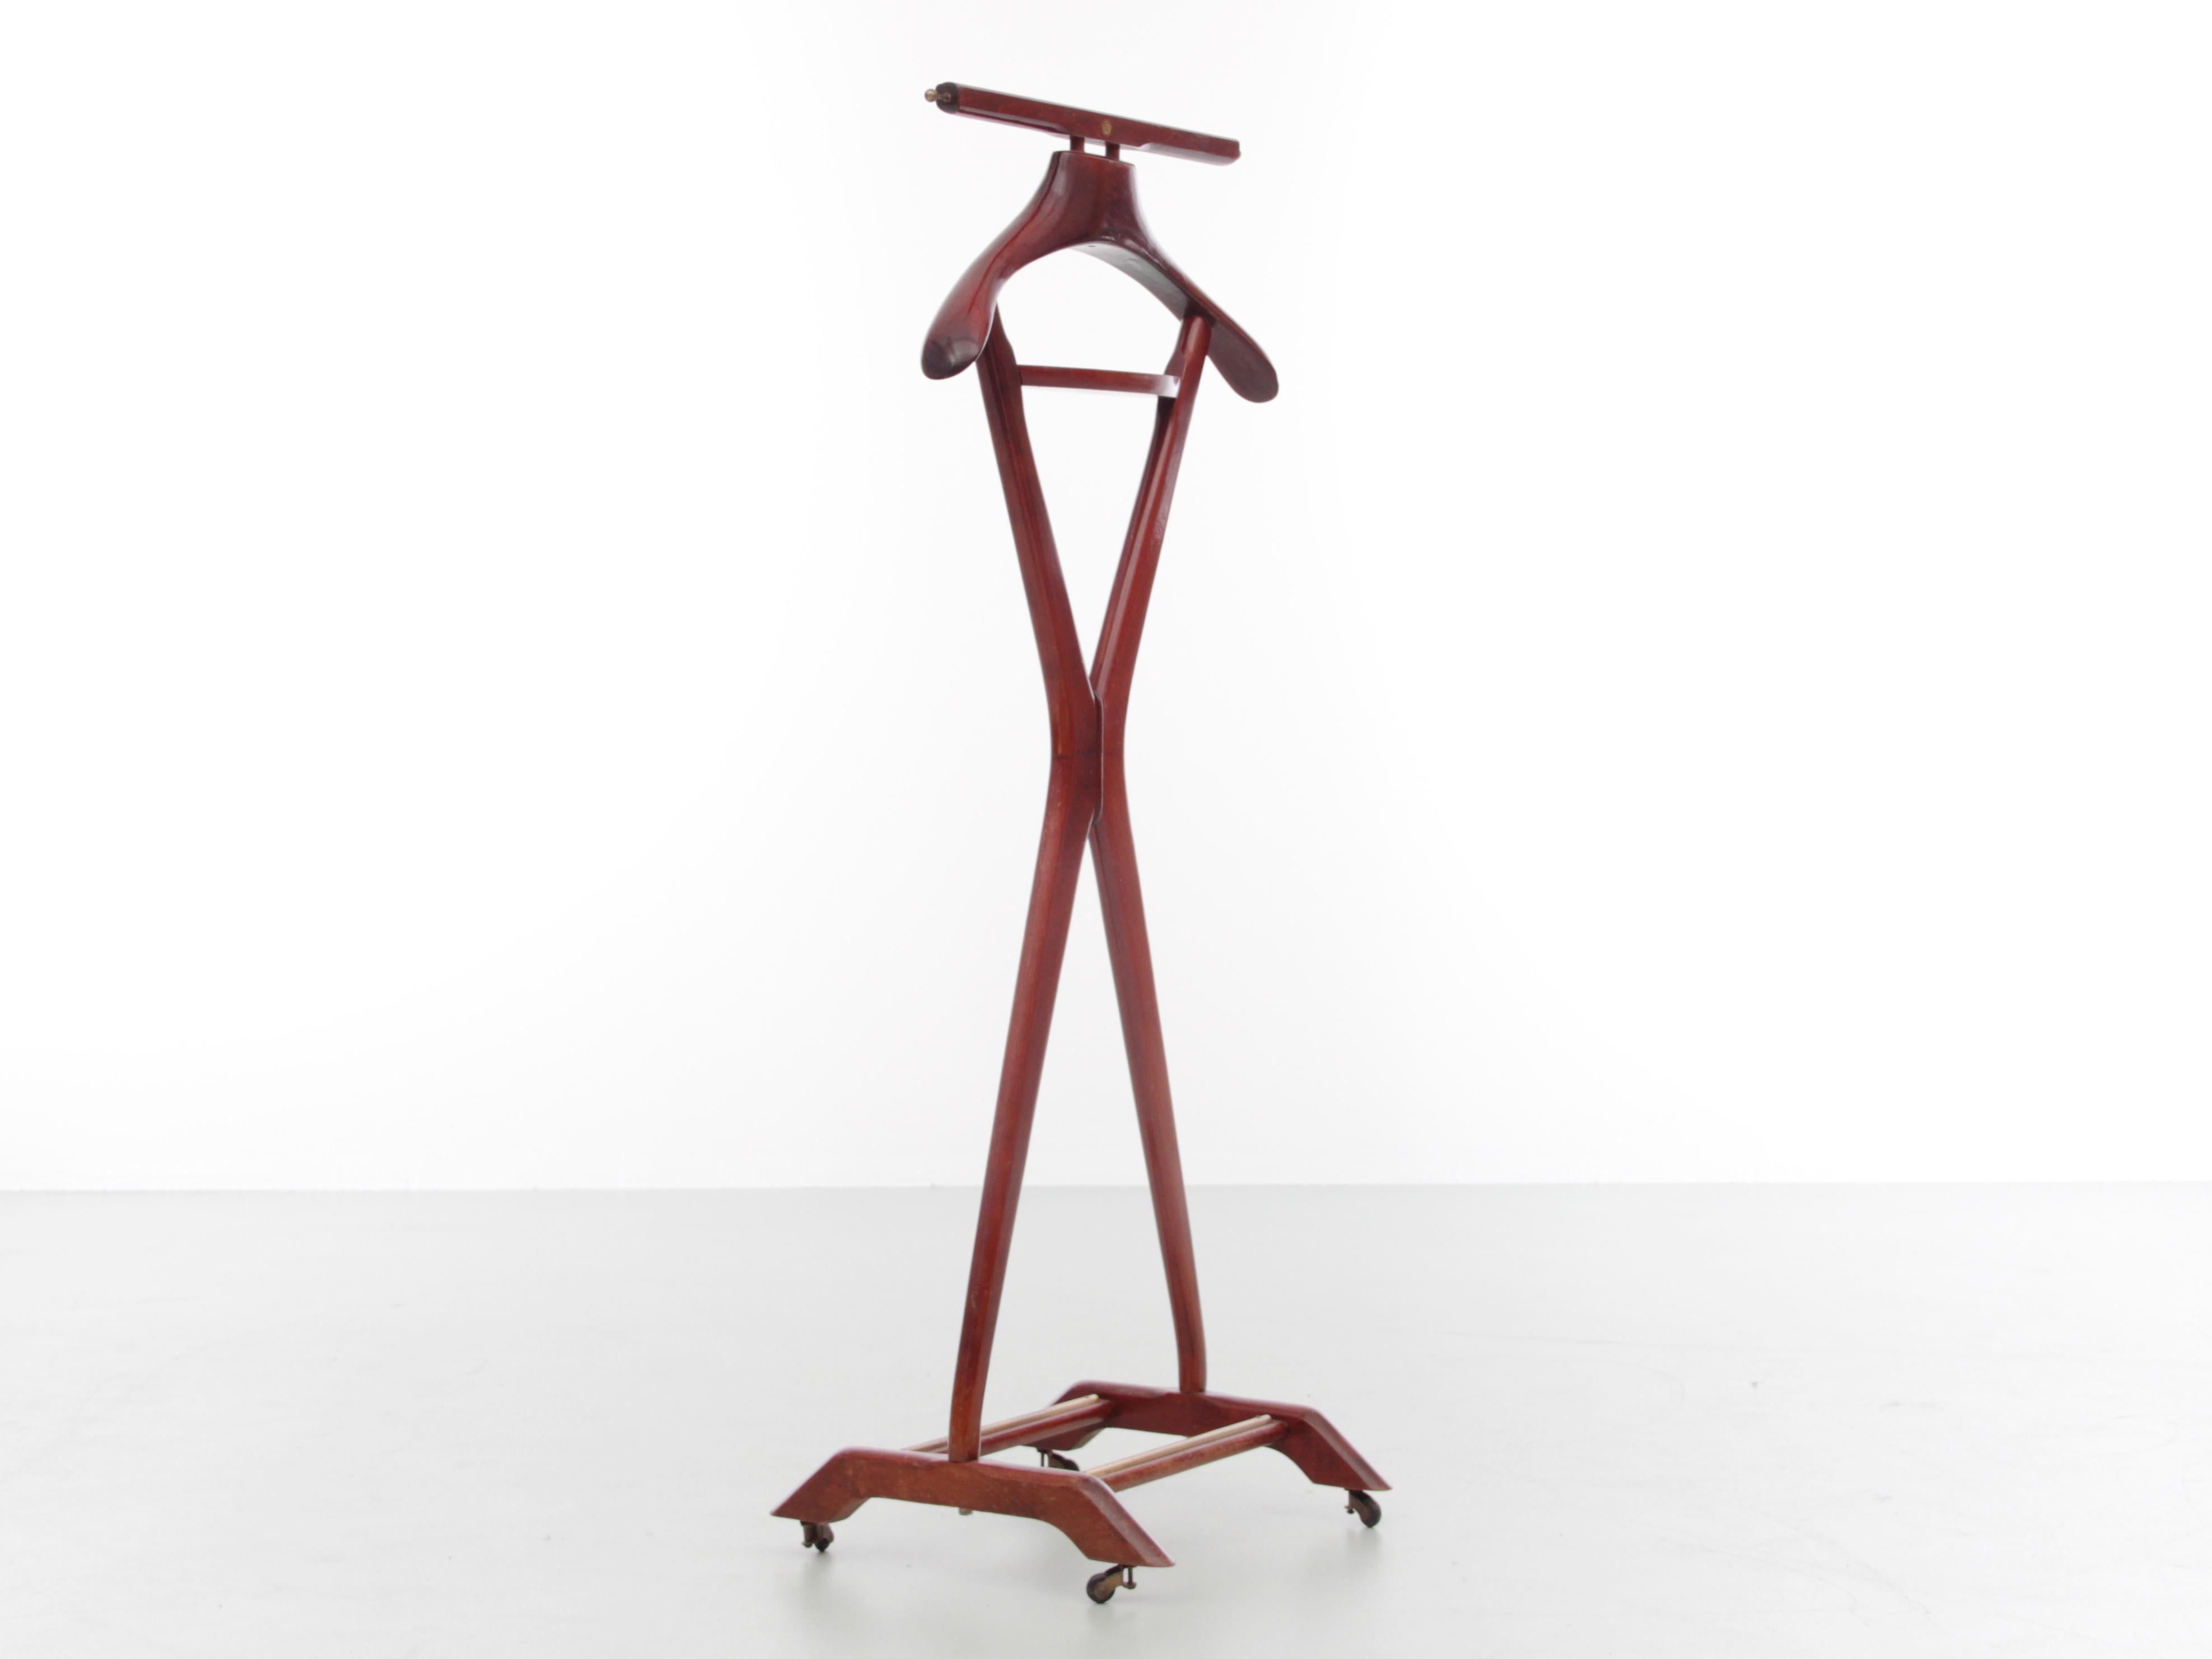 Mid-Century Modern valet clothes Stand designed by Ico Parisi during the 1950s. Manufacturerd in Italy by Fratelli Reguitti, the Stand is made of mahagany stained beech.